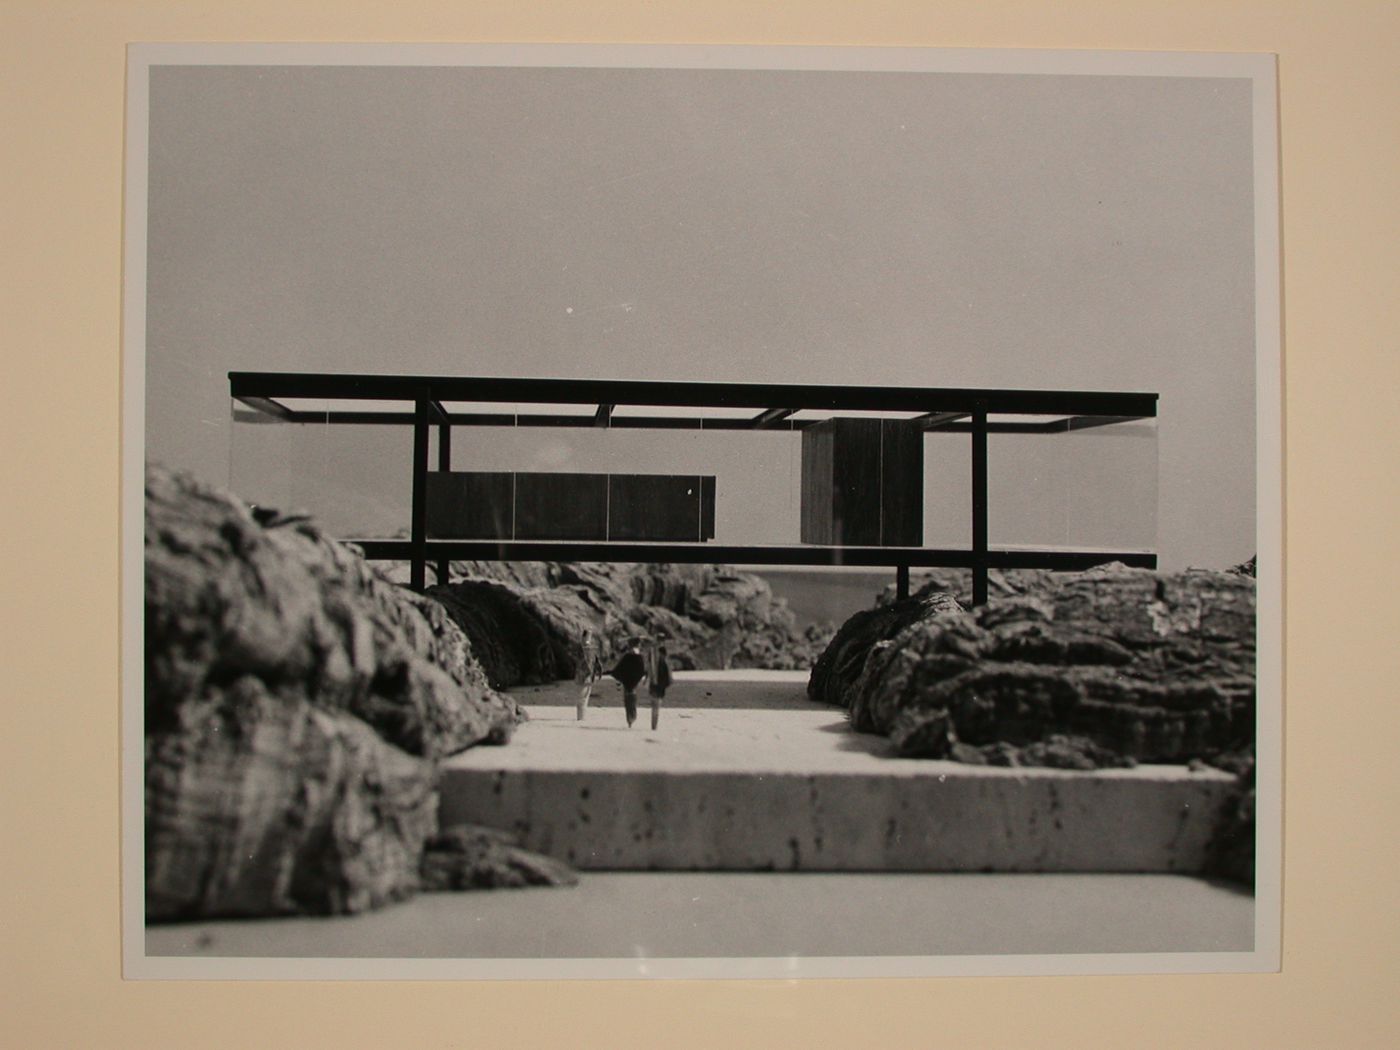 Photograph of a model for a Canyon House with steel structural framework